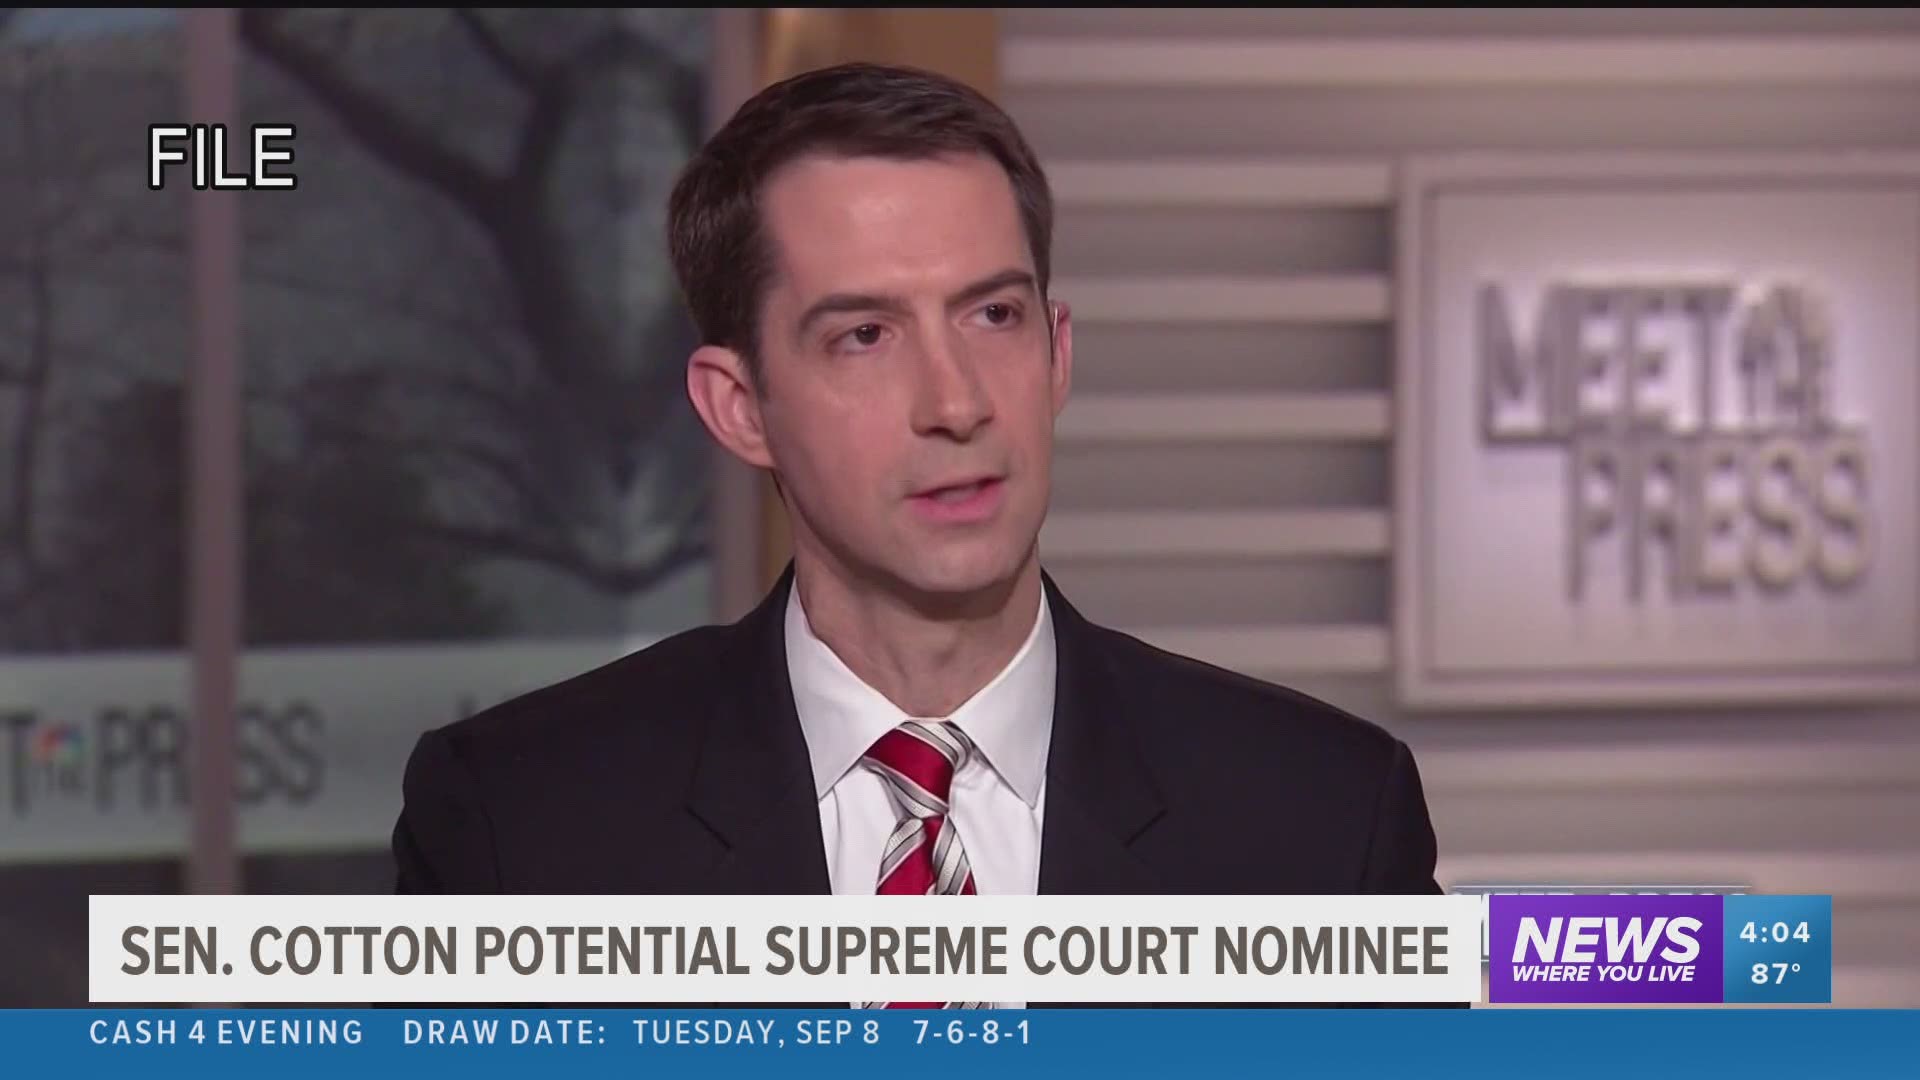 U.S. Senator Tom Cotton has been named as a potential U.S. Supreme Court nominee by President Trump.